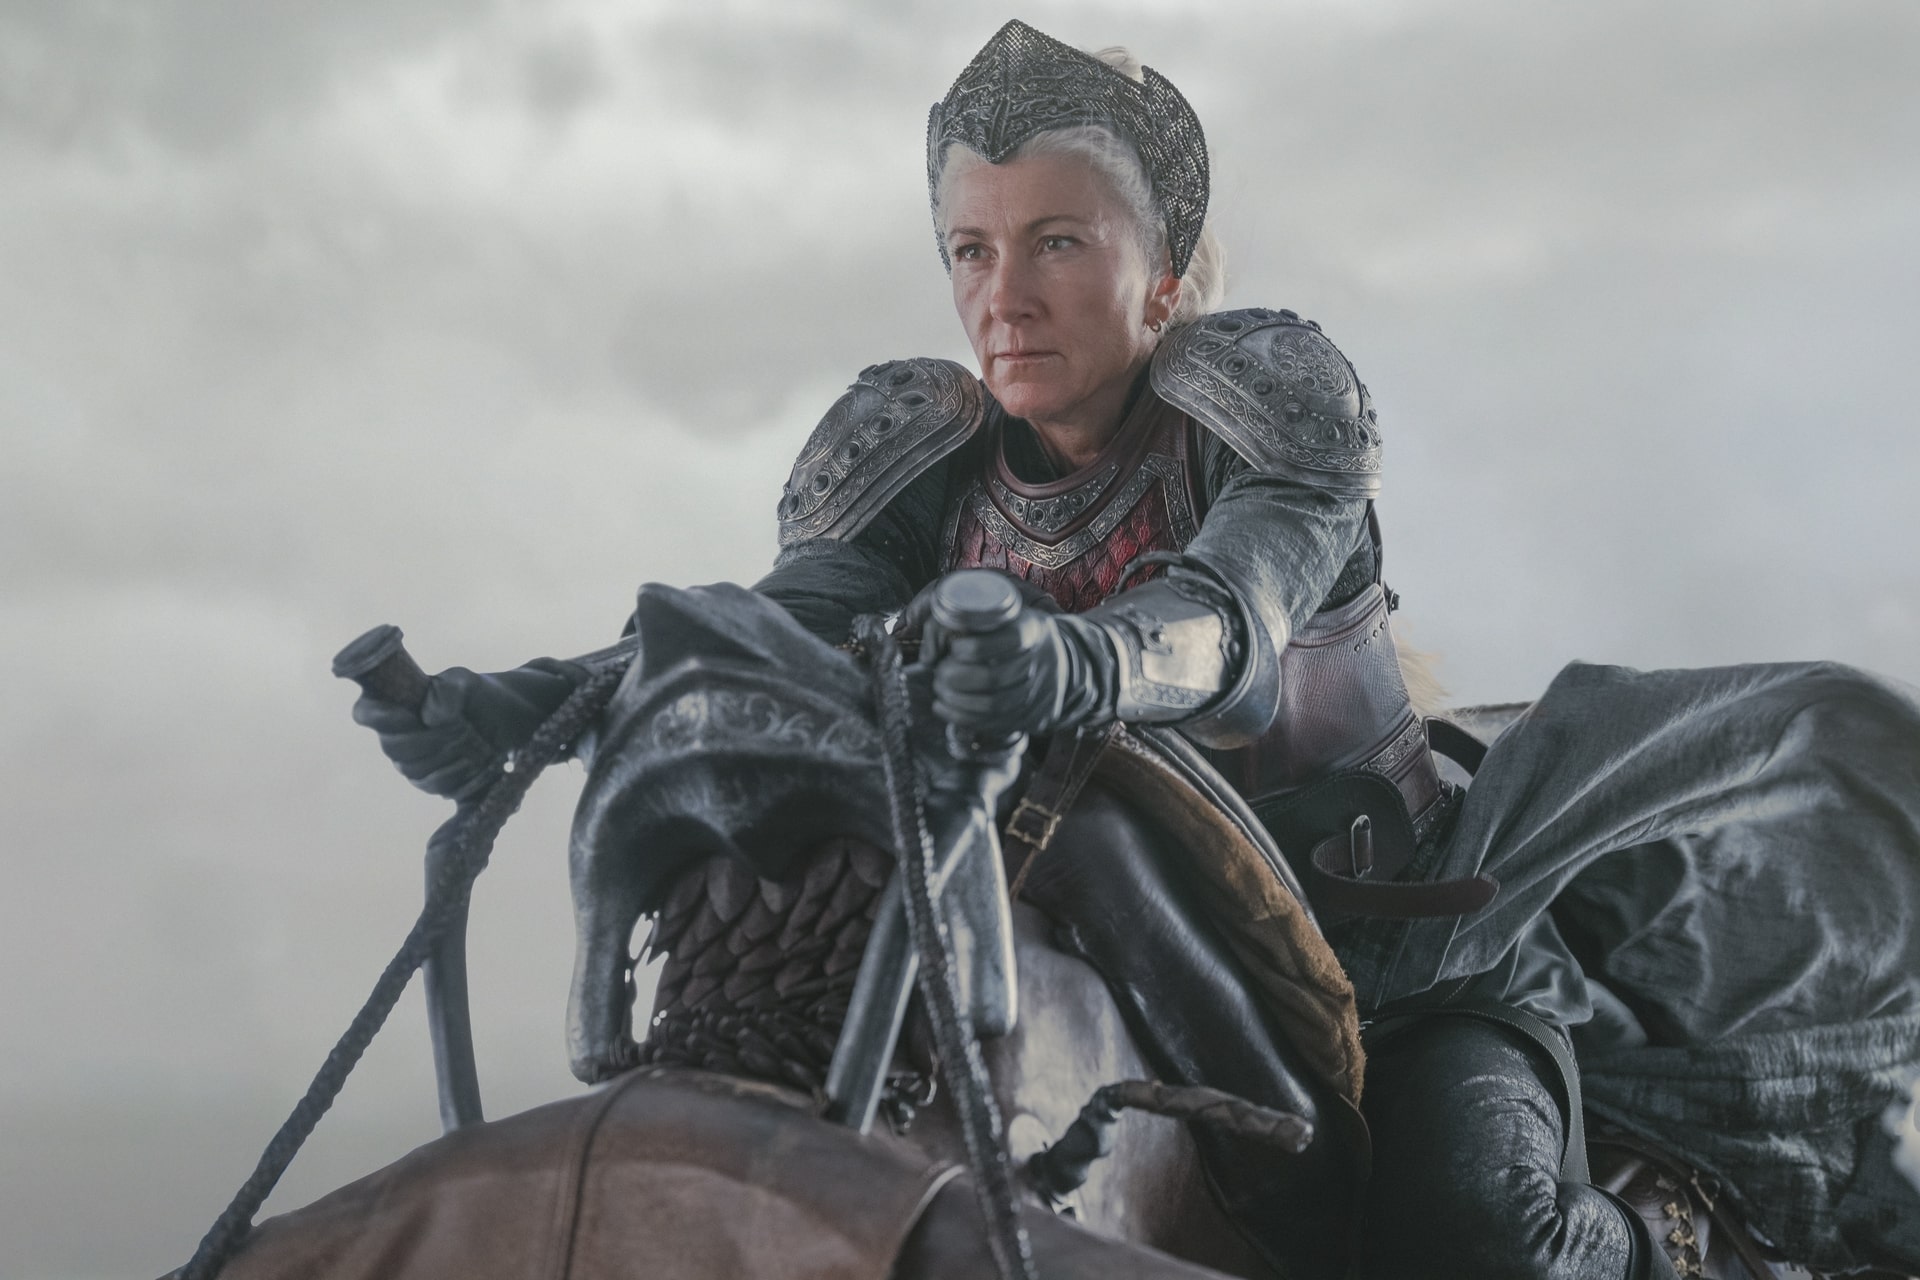 Eve Best as Rhaenys in House of the Dragon Season 2 Episode 4